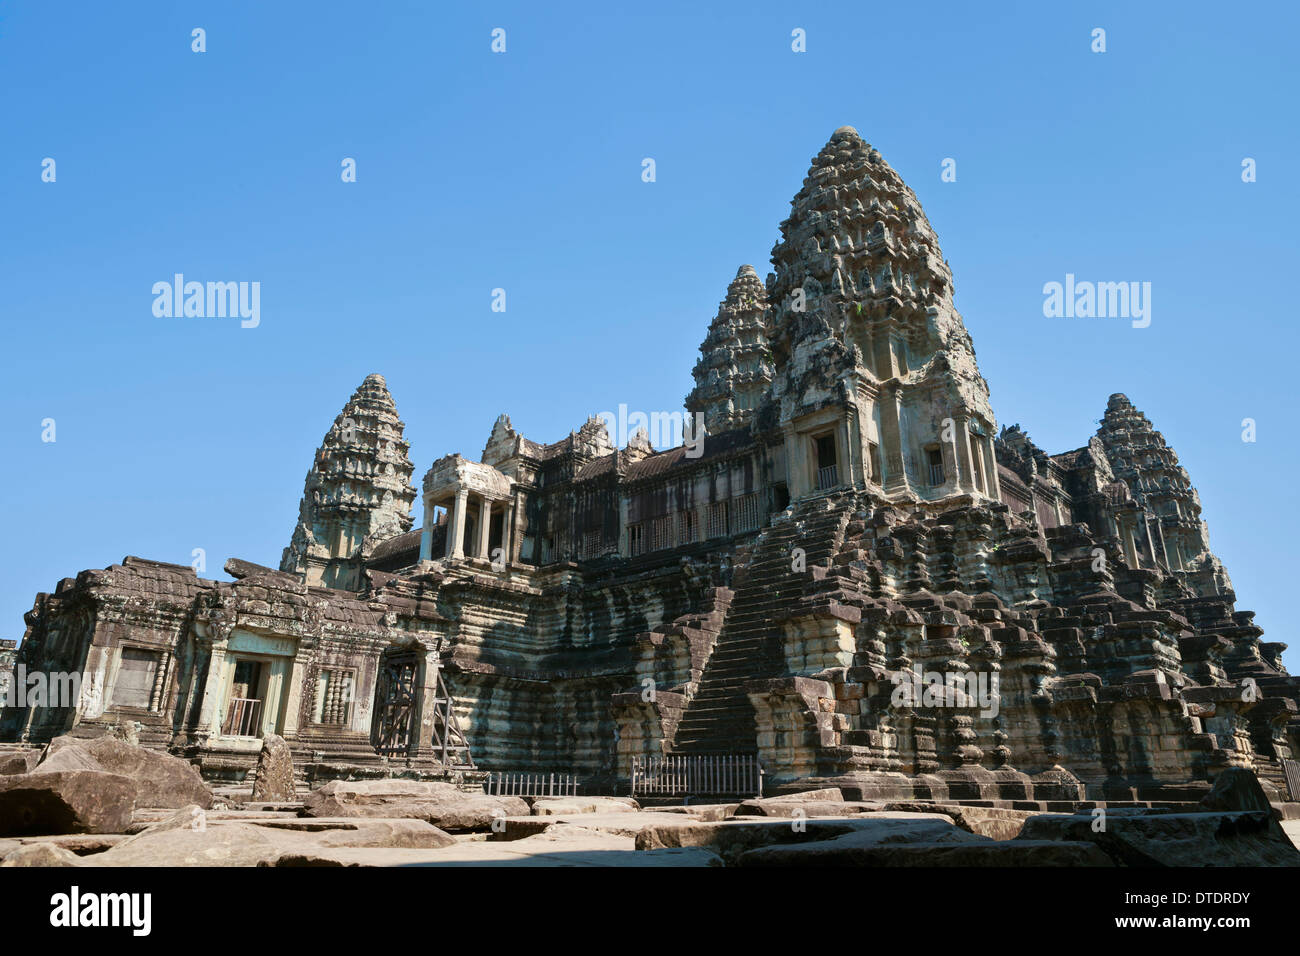 View of the central temple complex of Angkor Wat, Cambodia Stock Photo